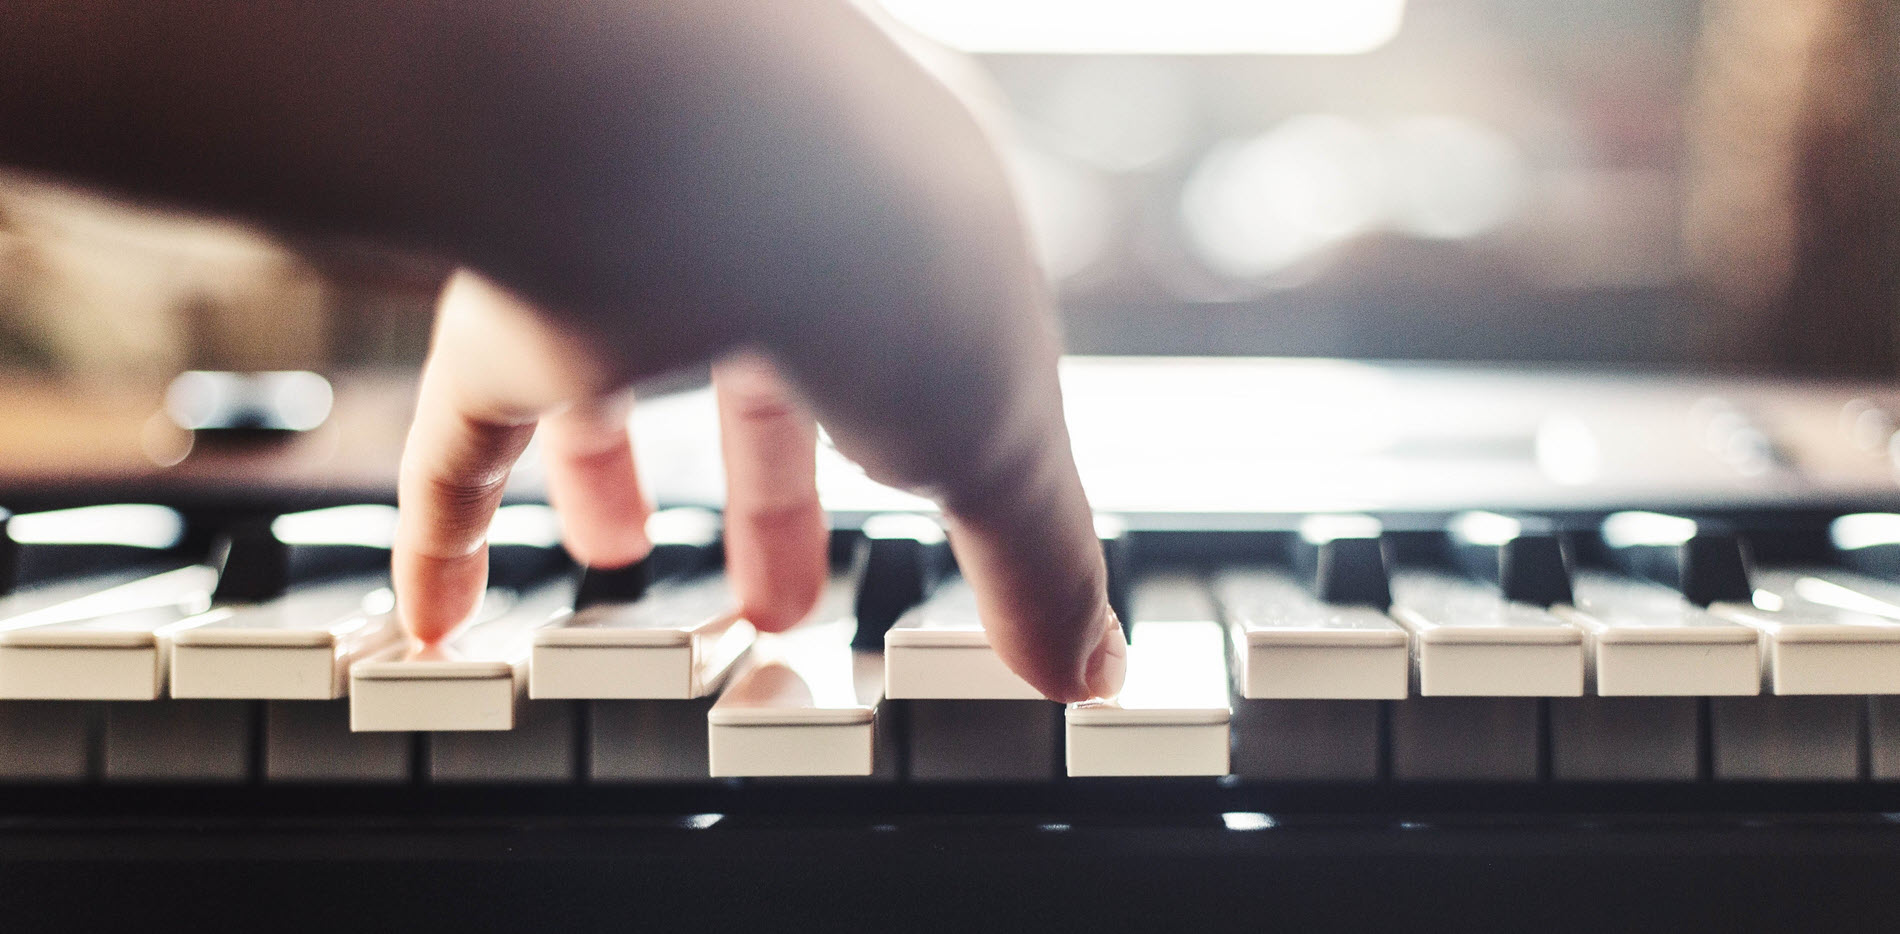 Closeup of someone's hand playing a chord on a keyboard.